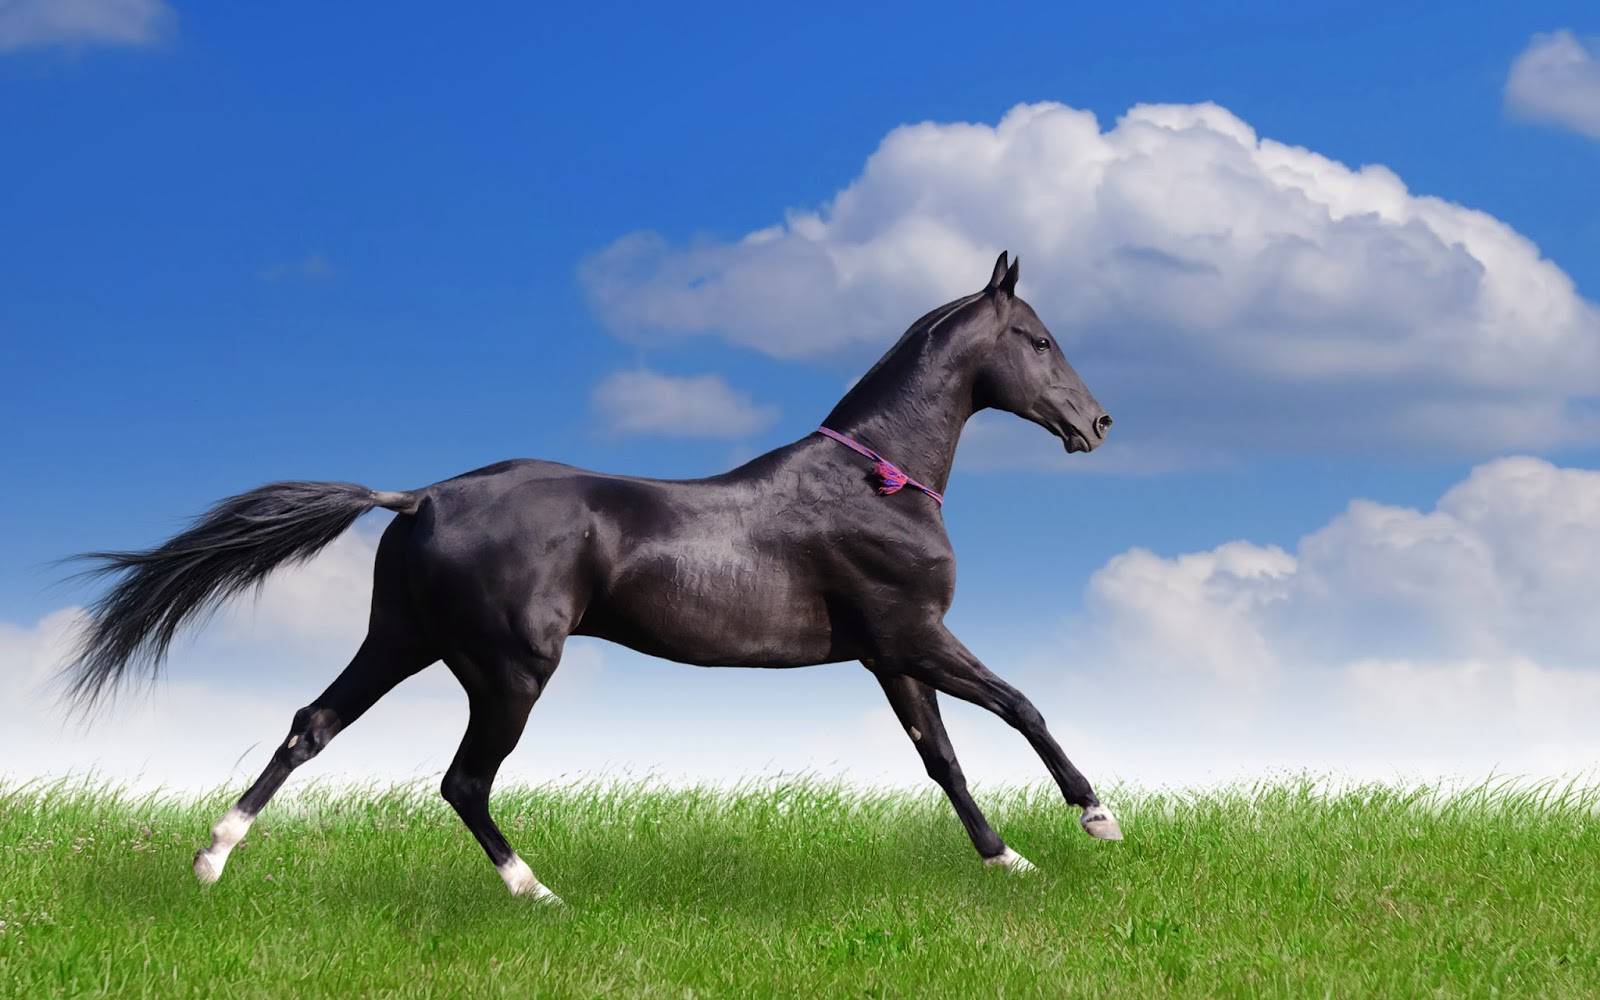 Desktop Horse And Make This HD Wallpaper For